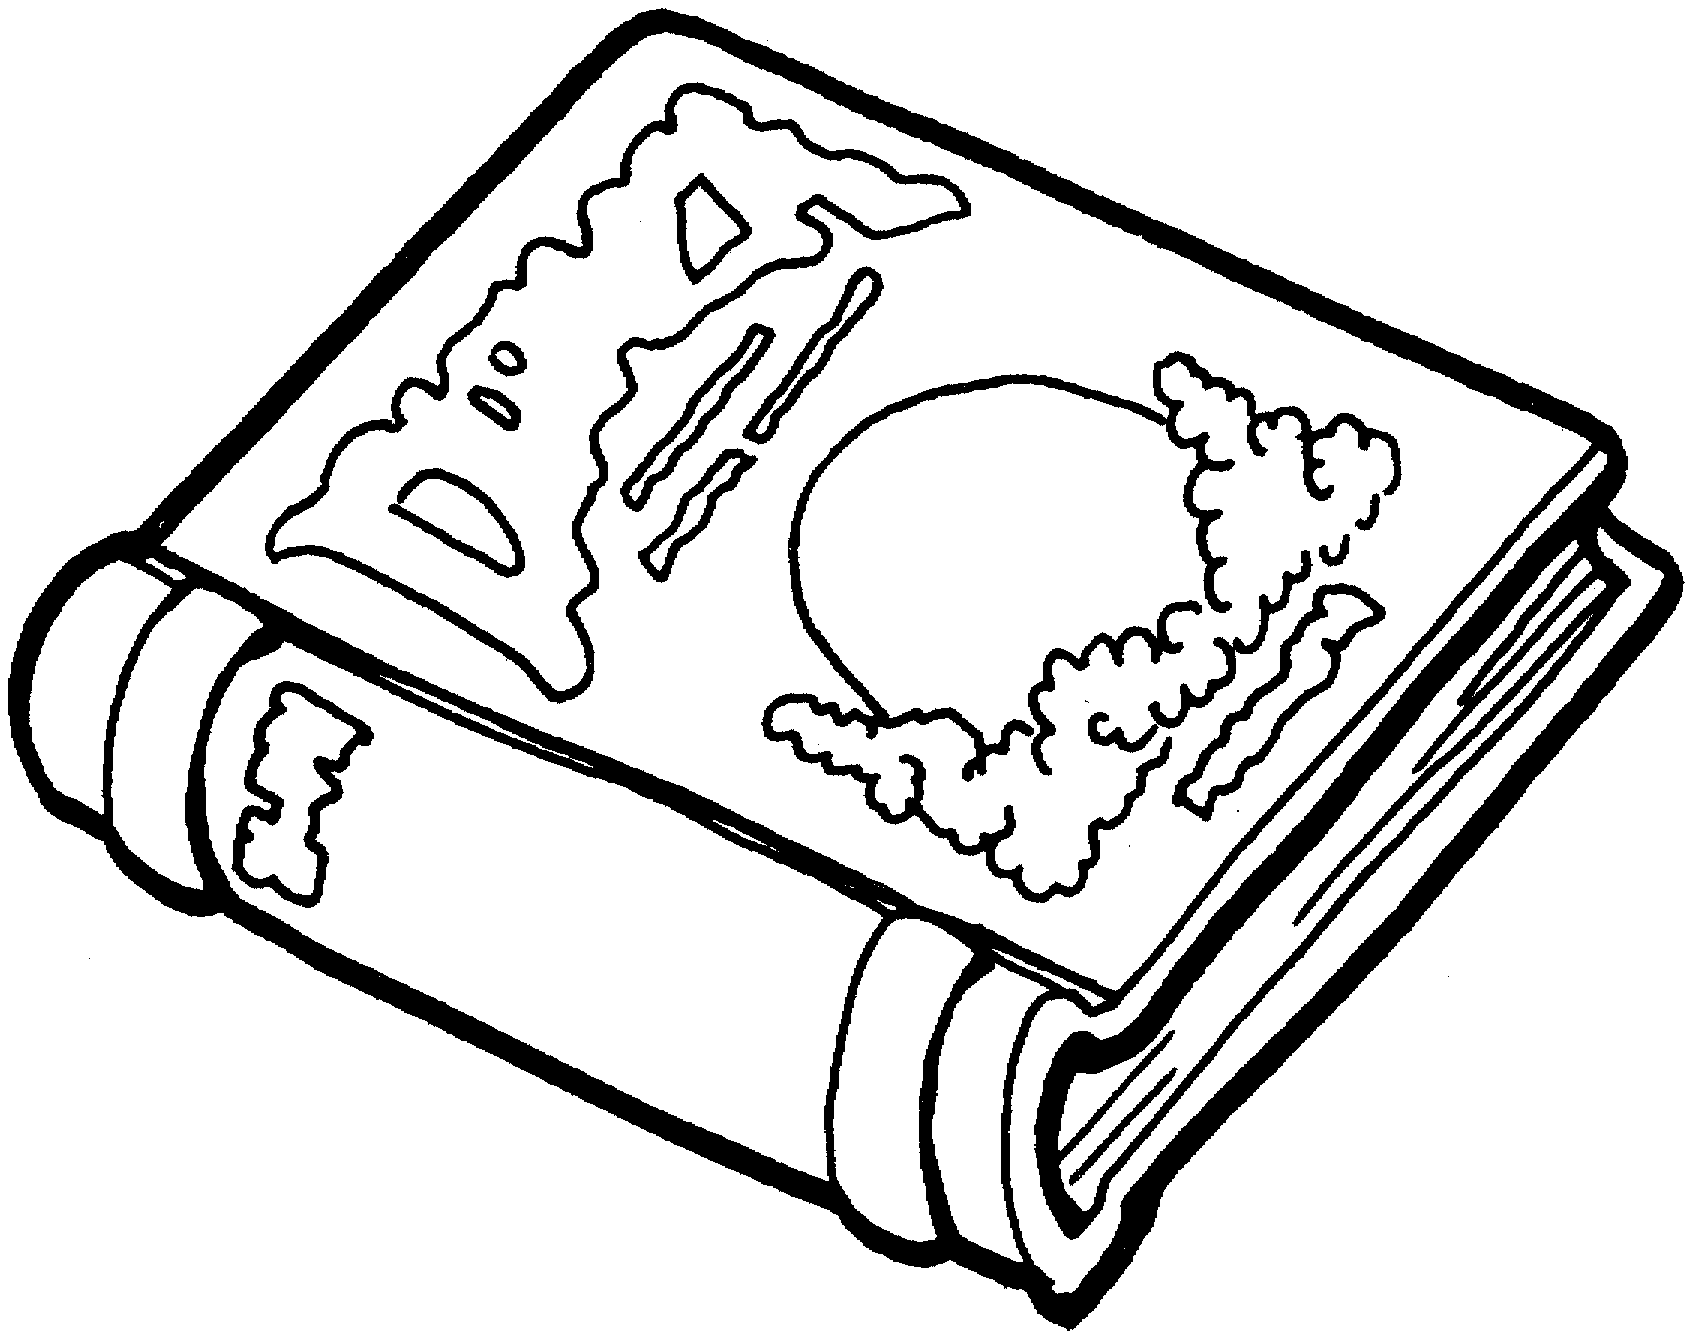 Notebook Coloring Page | Clipart Panda - Free Clipart Images